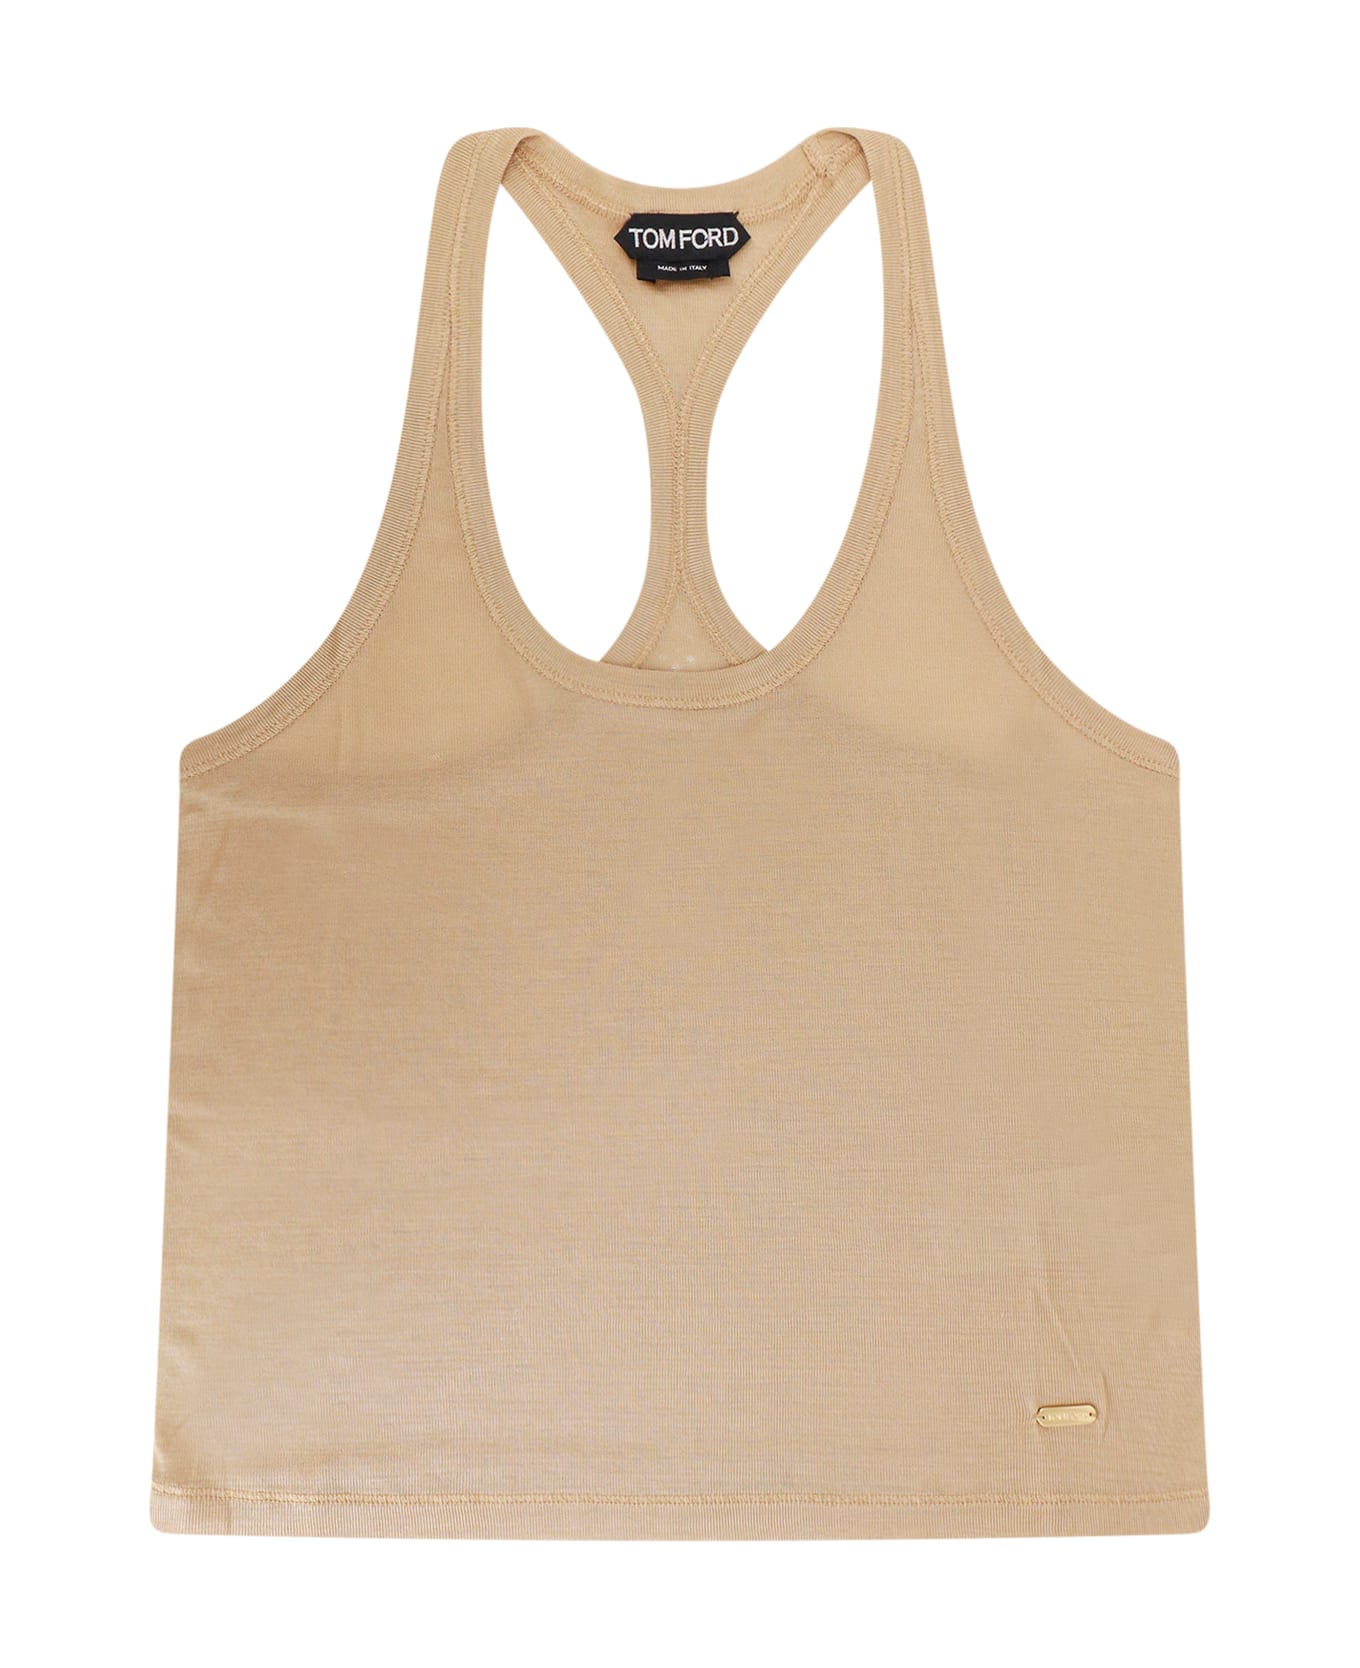 Tom Ford Top - Gold